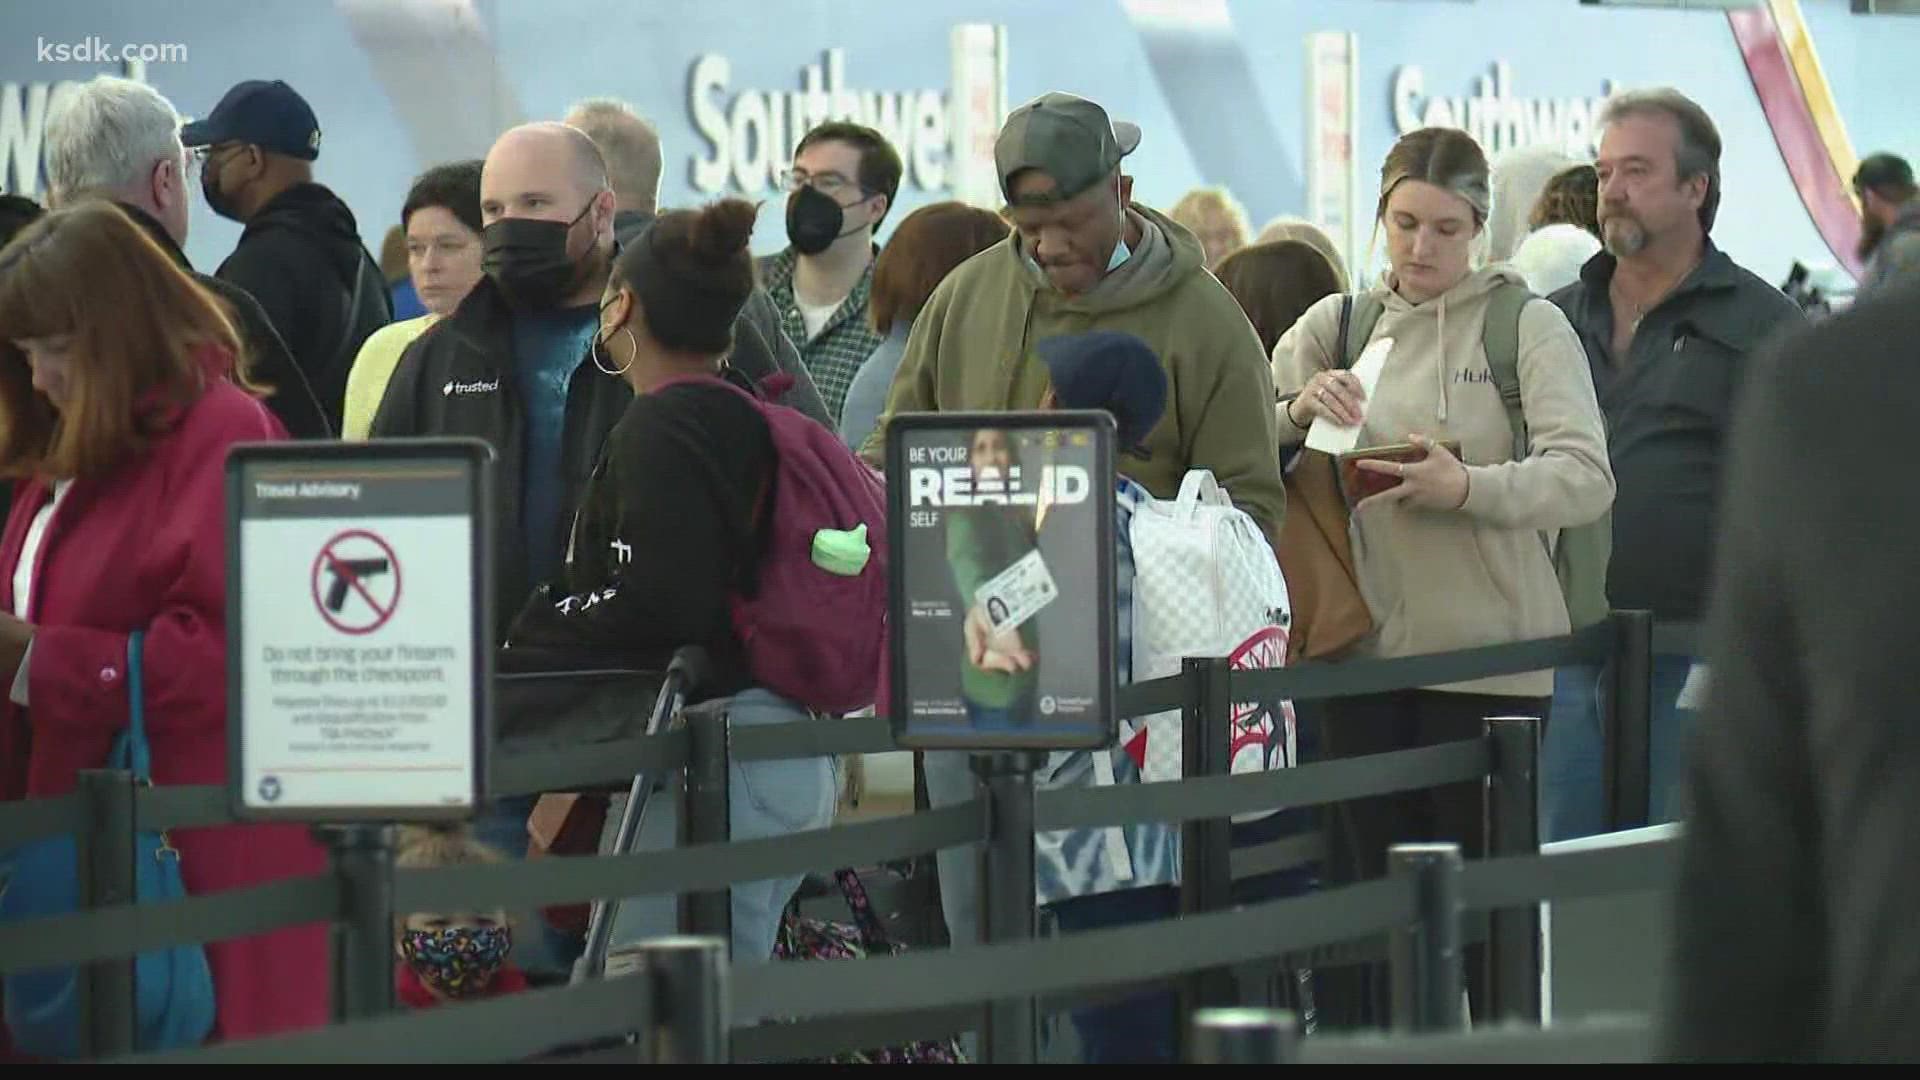 "Face masks will no longer be required for passengers coming through, visitors to or any employee at St. Louis Lambert International Airport," a statement reads.